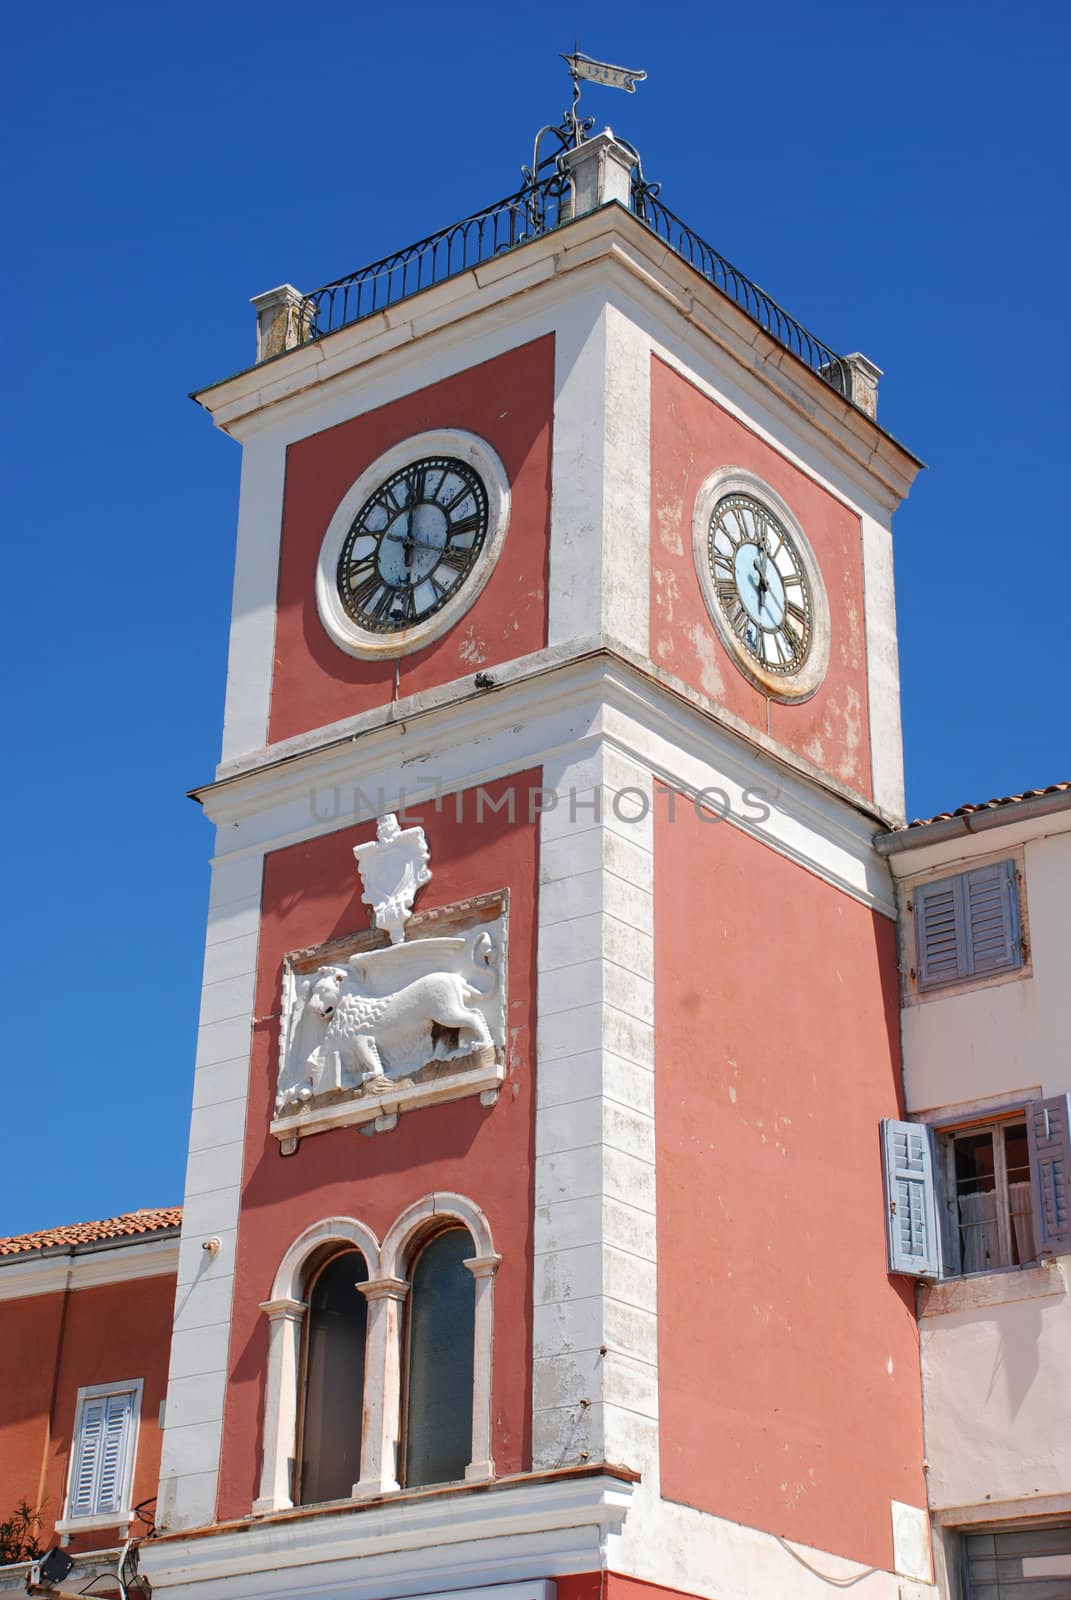 The bell tower in the center of Rovinj city, Croatia